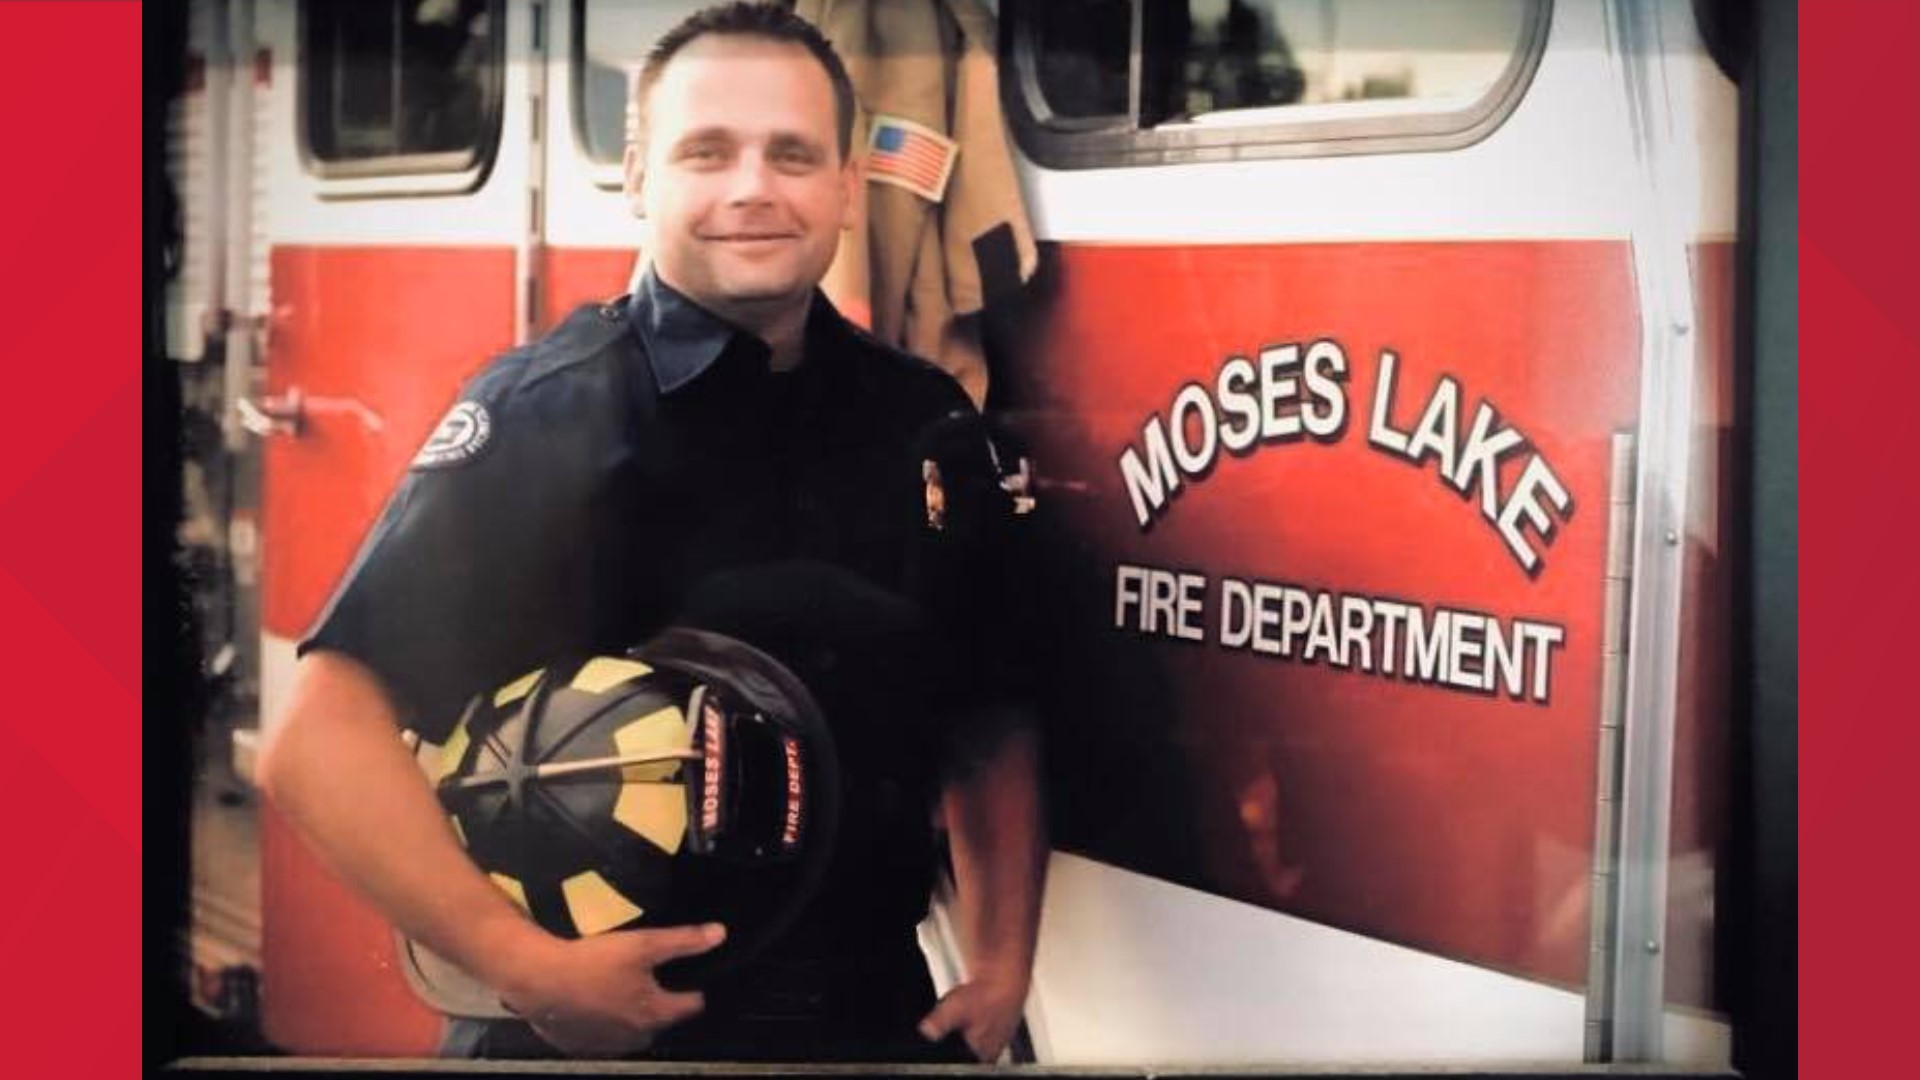 The wife of late Moses Lake Firefighter Andrew Deering said he died by suicide. She is sharing his story to encourage others to talk about mental illness.